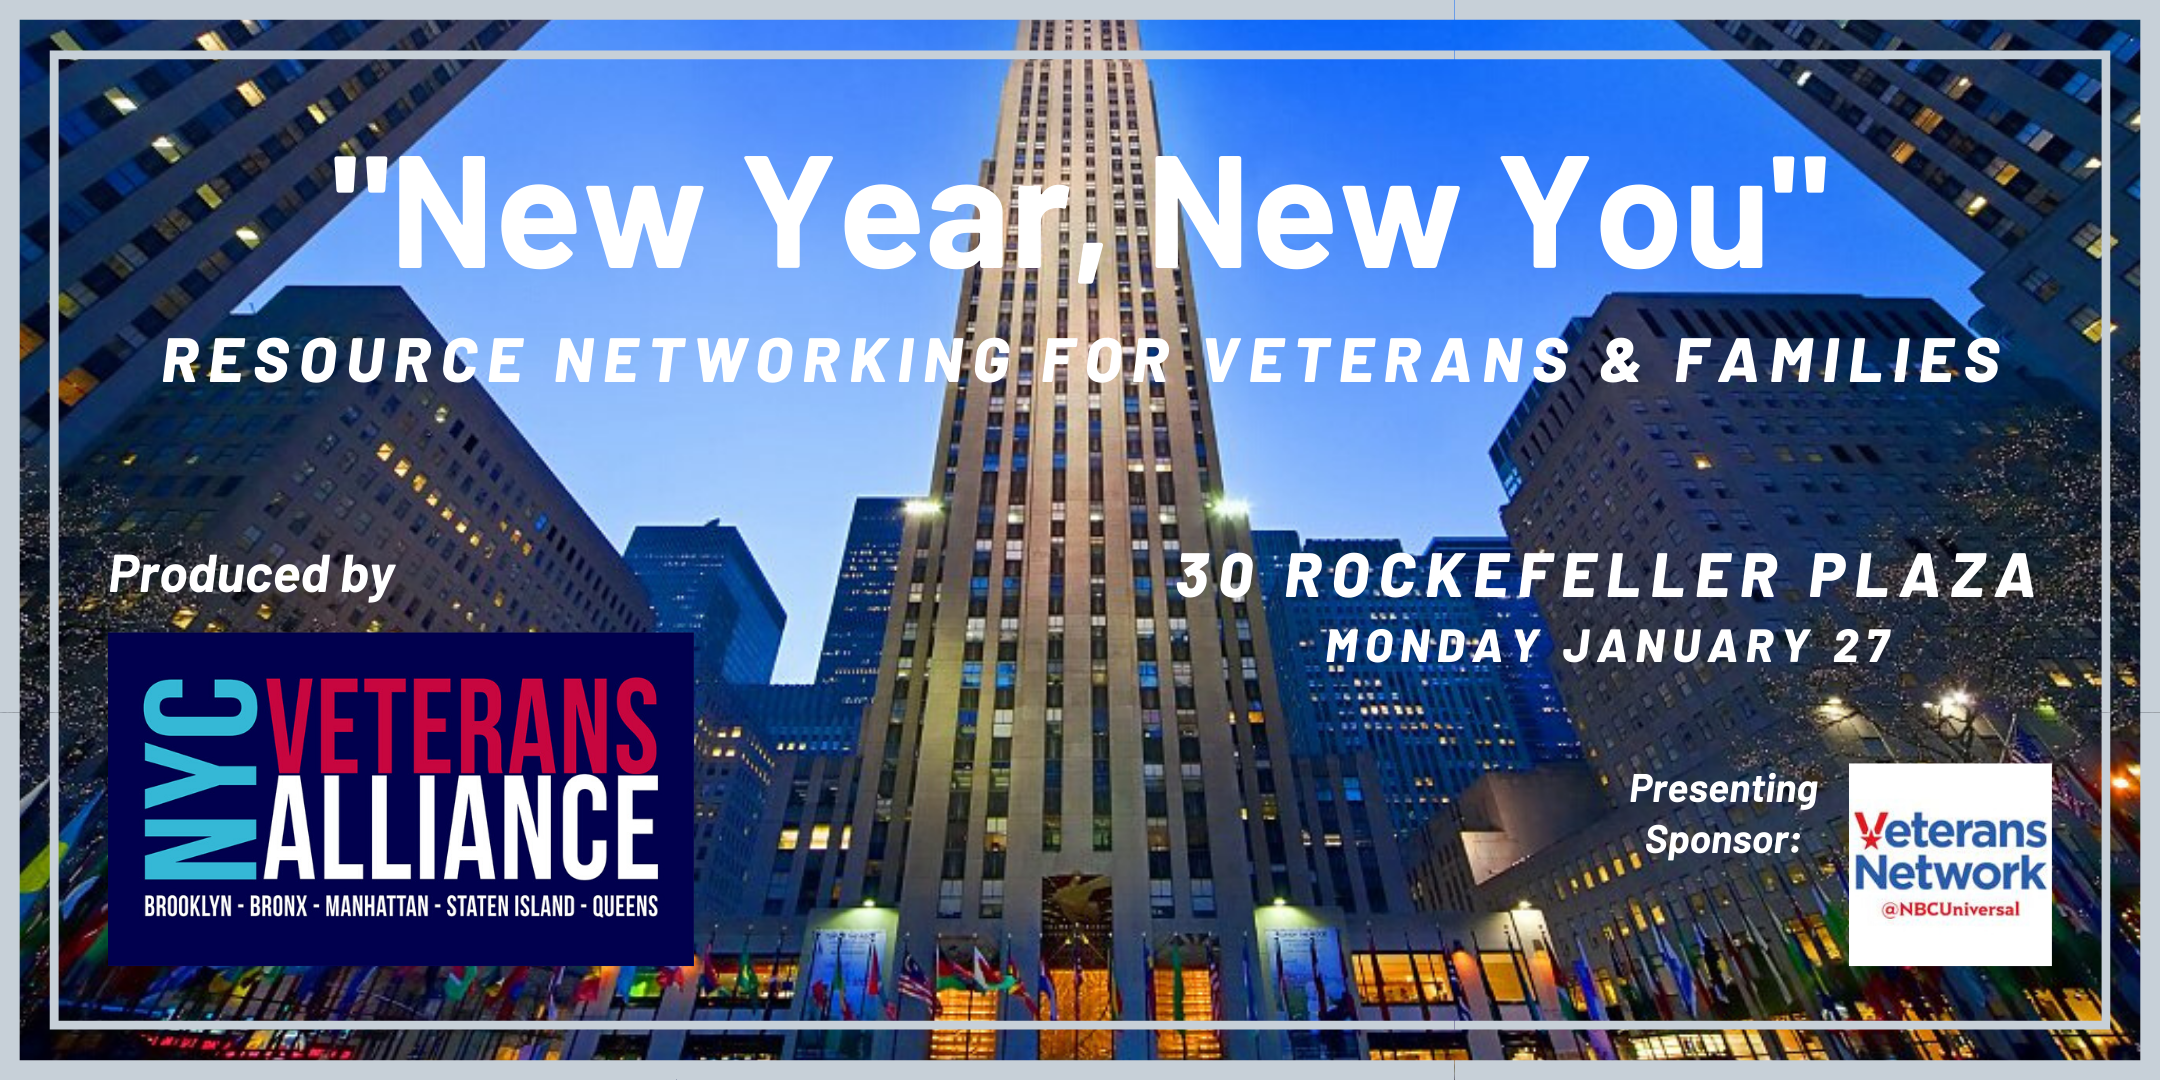 New Year, New You Resource Networking for Veterans & Families